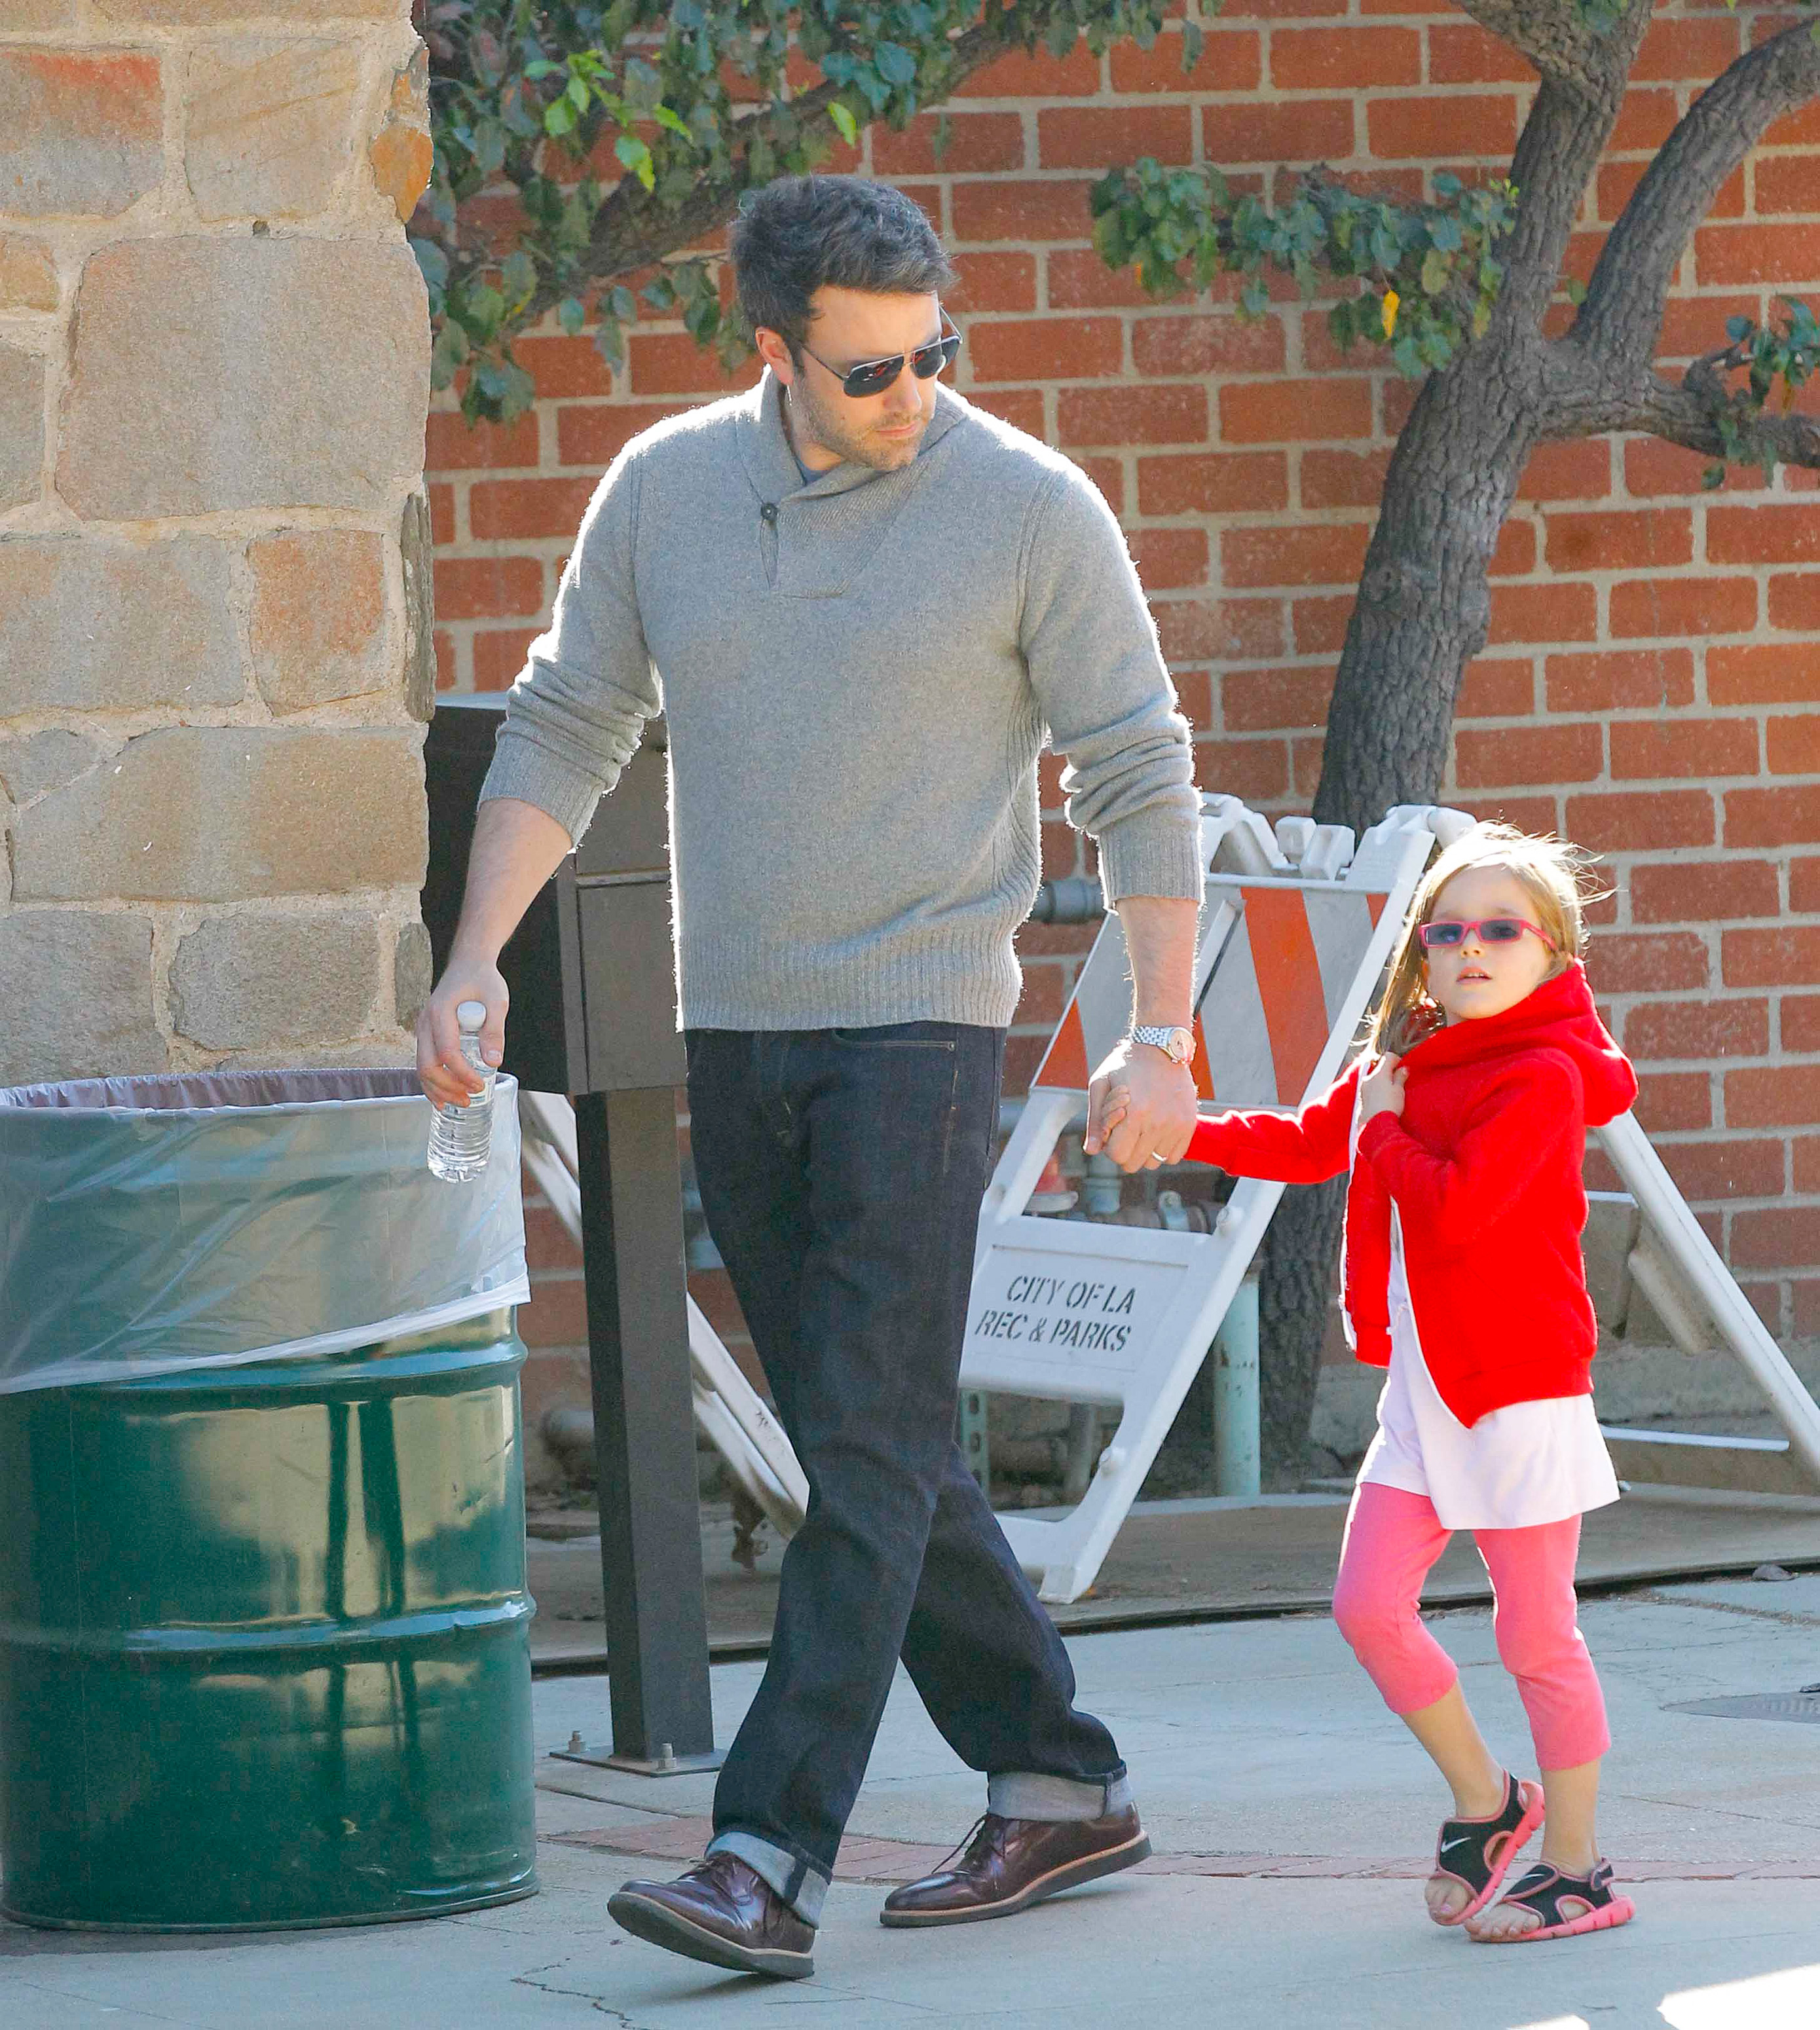 Ben and Fin Affleck spotted out in Los Angeles, California on November 24, 2013 | Source: Getty Images